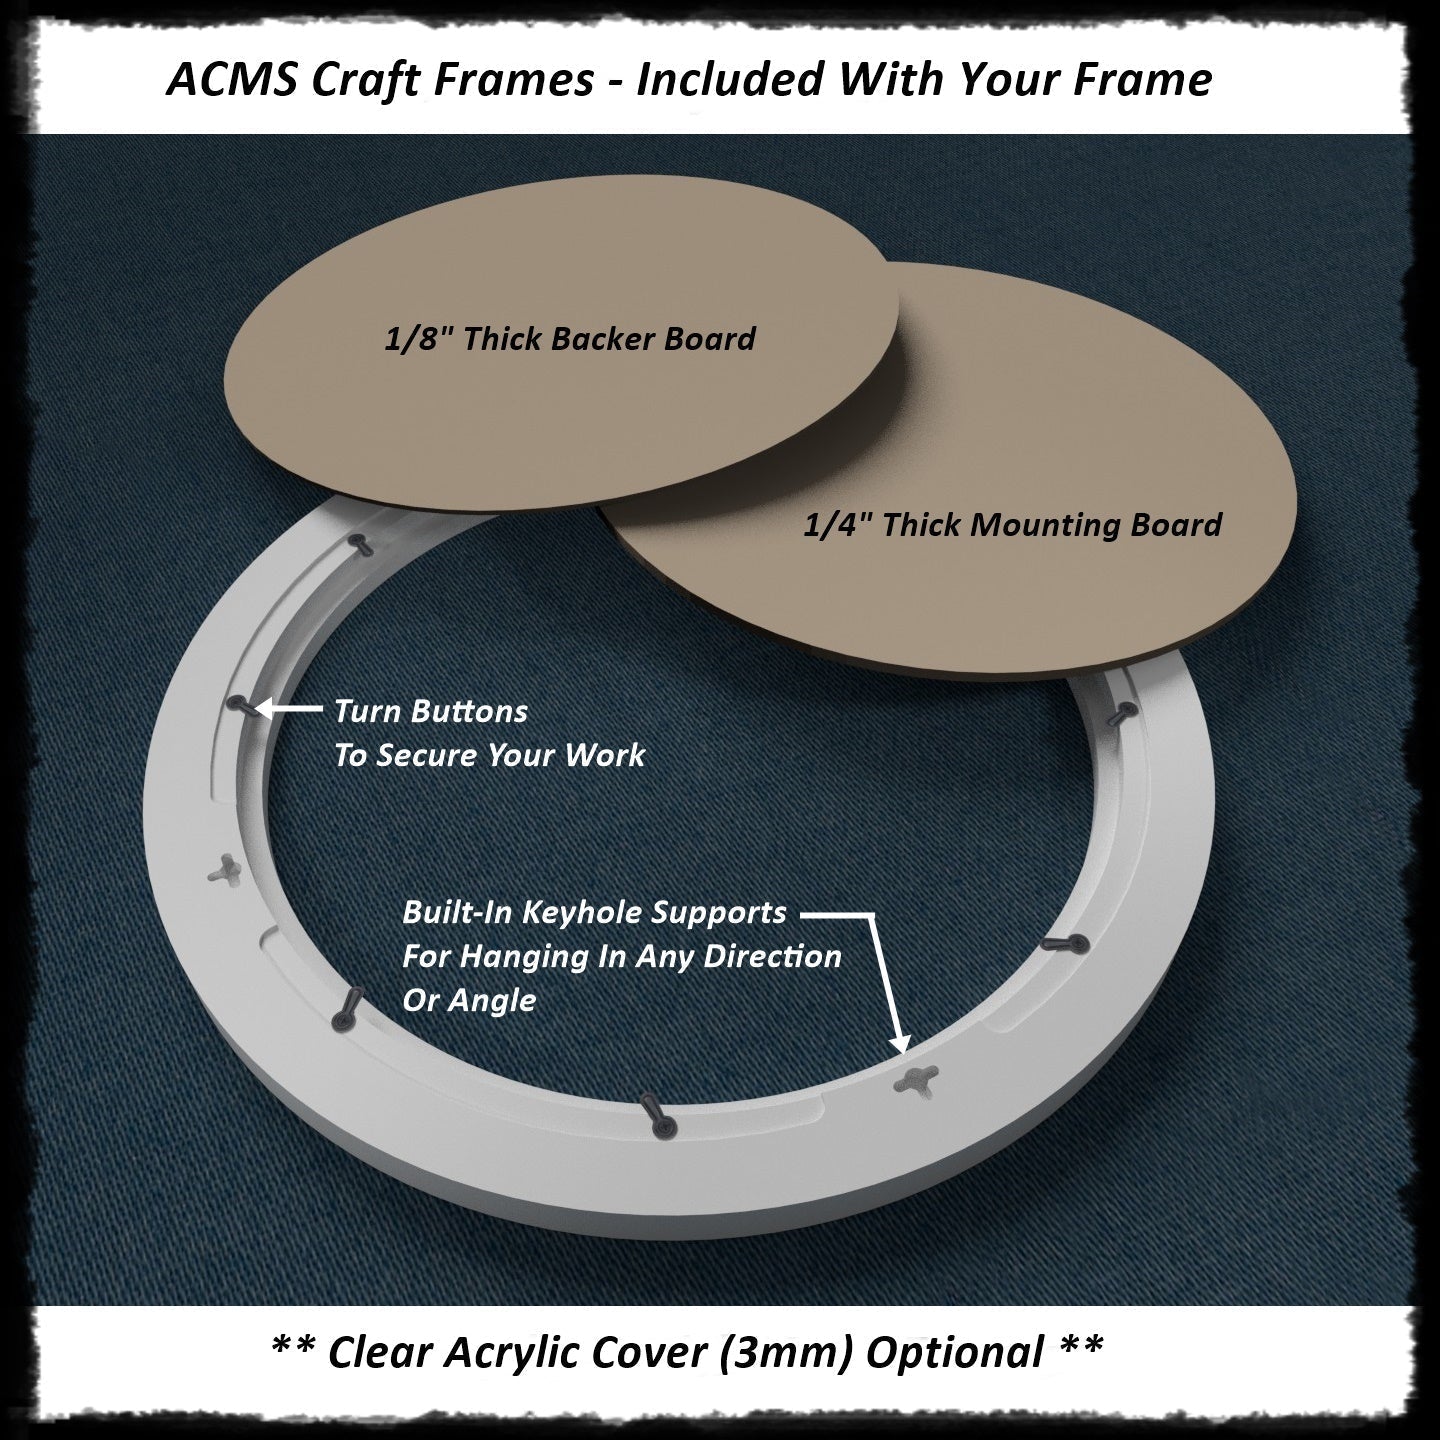 Oval Craft Frame - DOUBLE COVE Profile - 1 1/4" Frame Width - 1" Thick